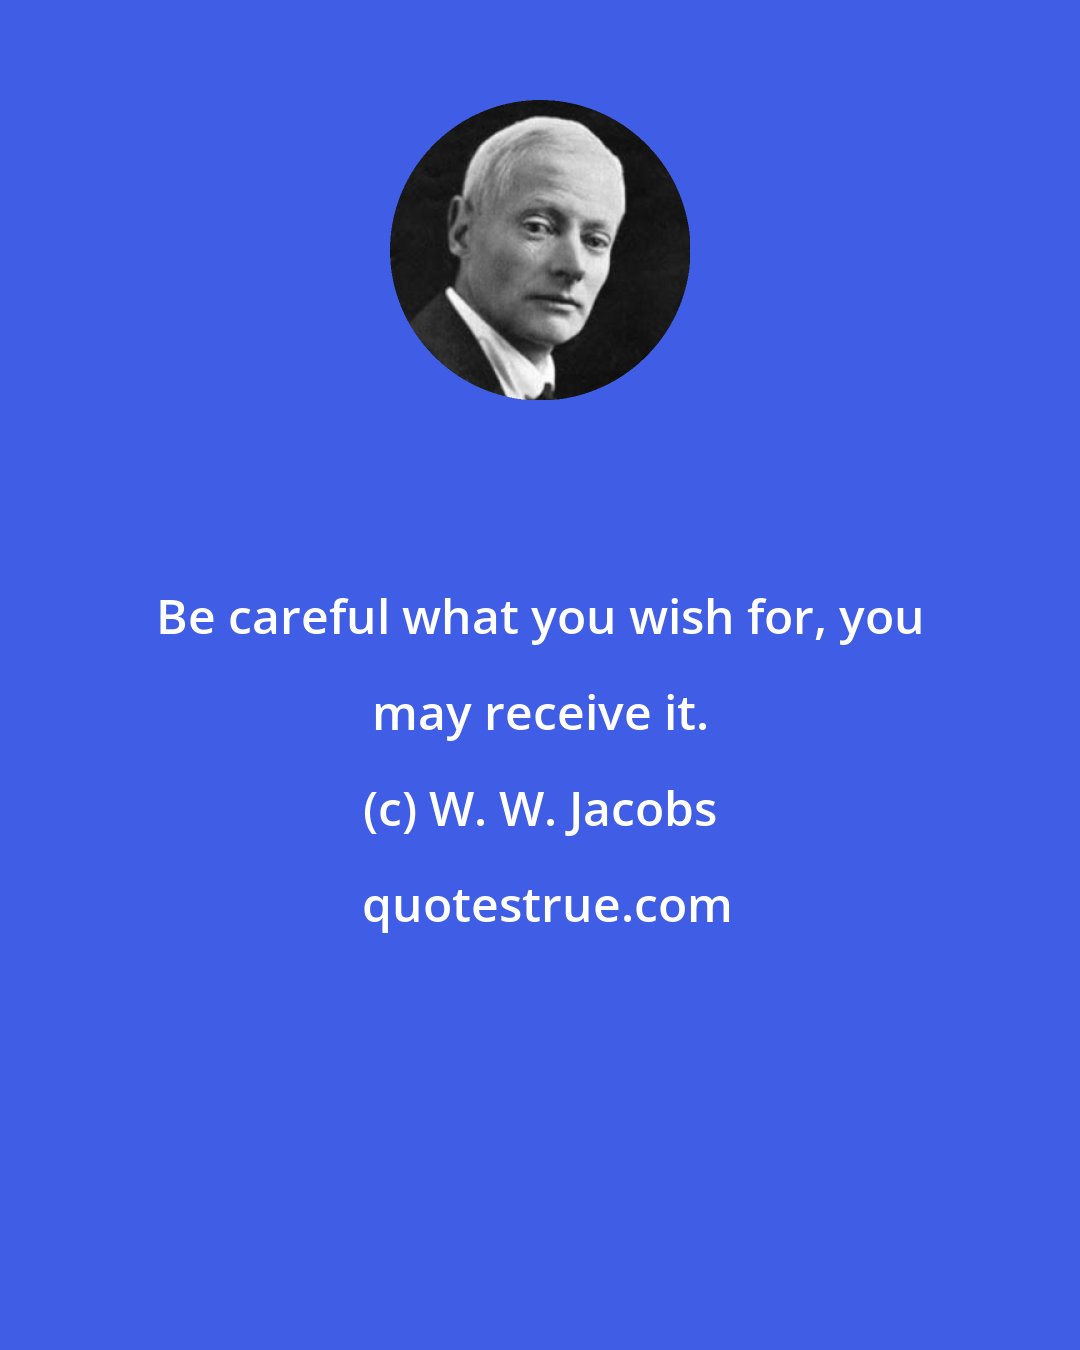 W. W. Jacobs: Be careful what you wish for, you may receive it.